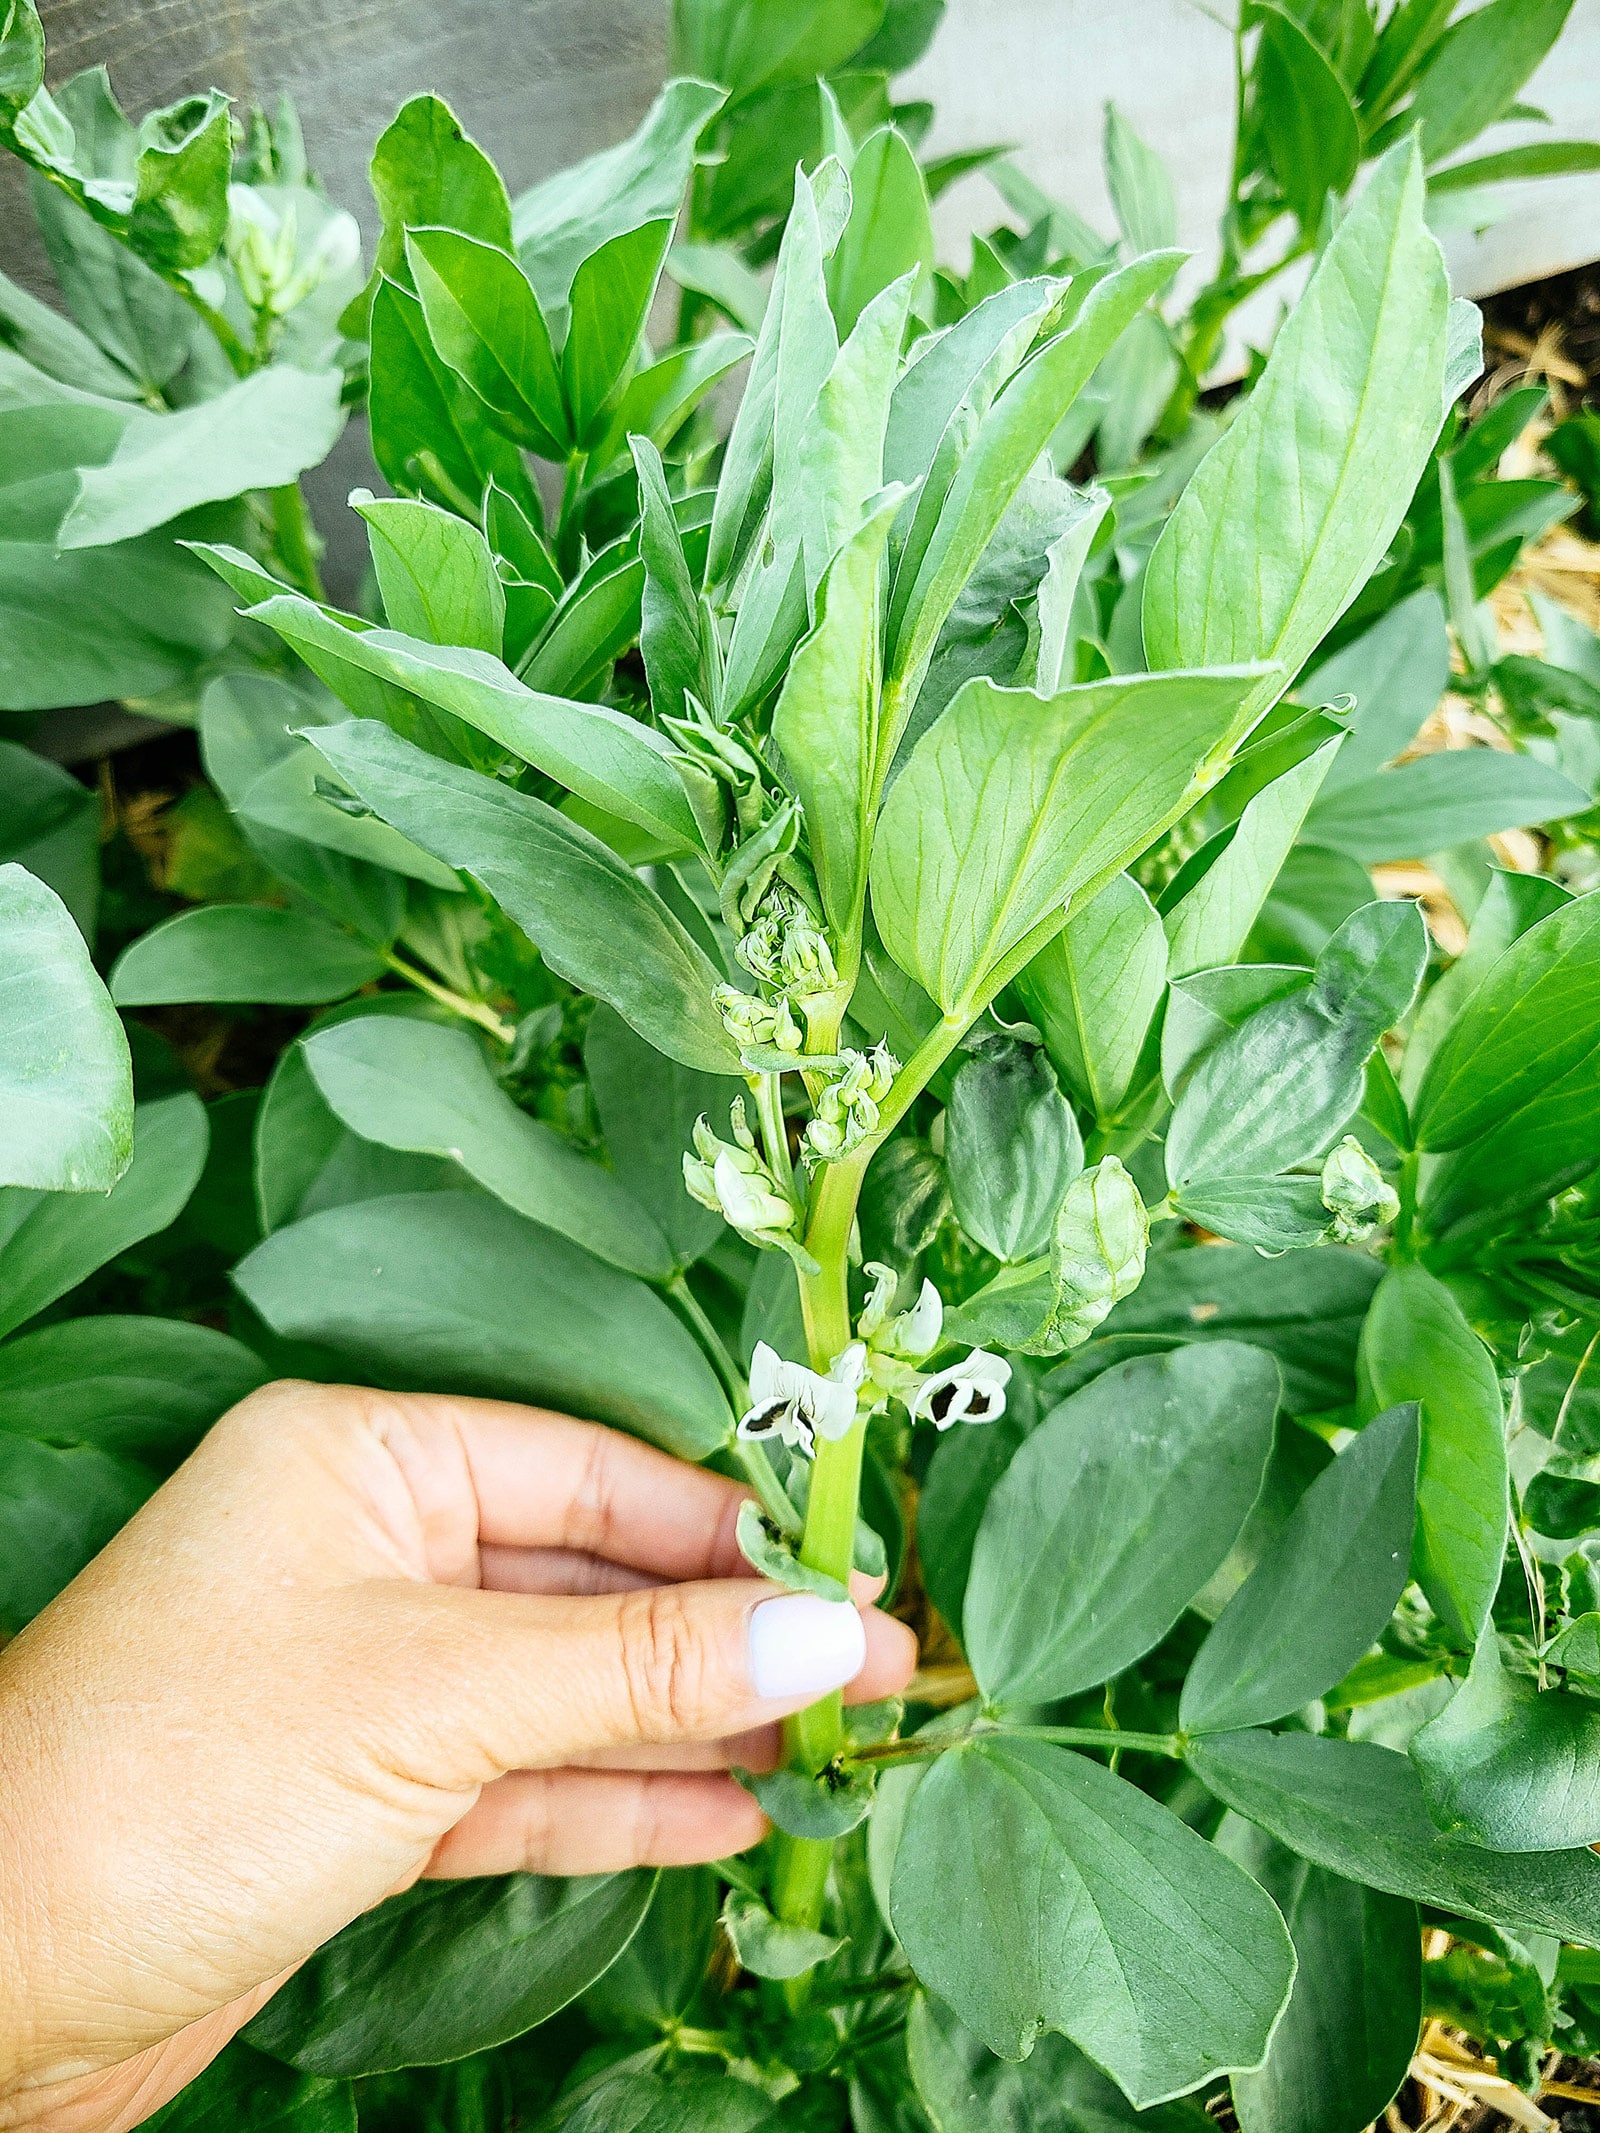 Woman's hand holding a fava bean plant stem with white flowers blooming